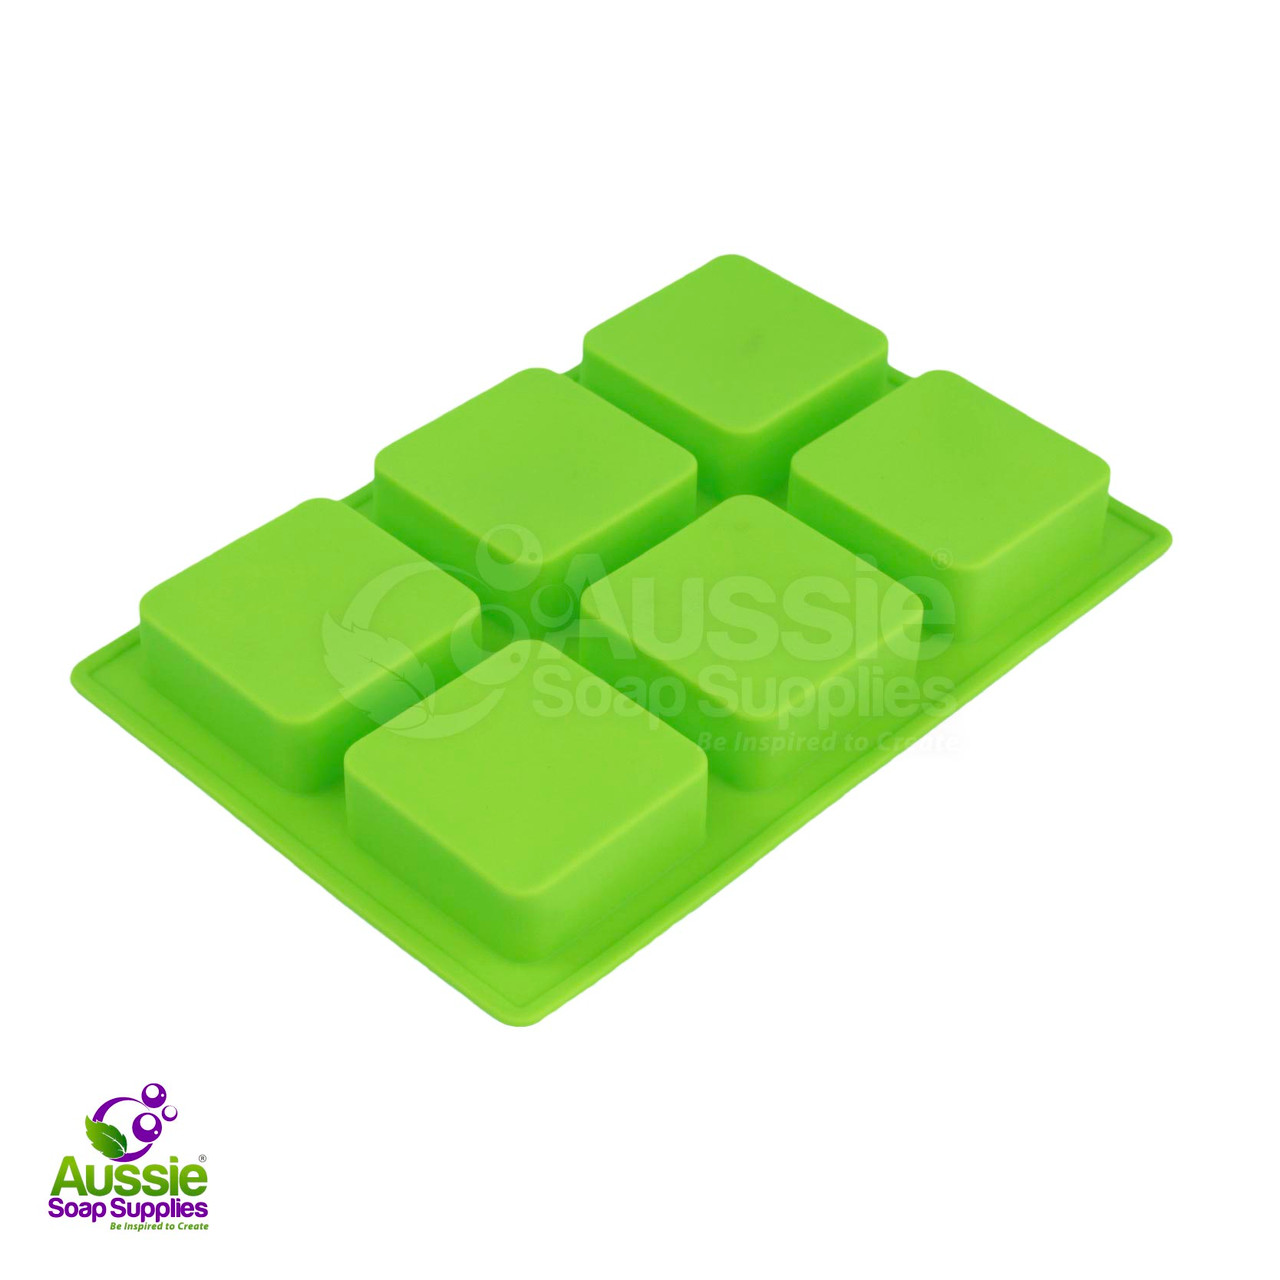 Large Square Silicone Mould - Little Green Workshops